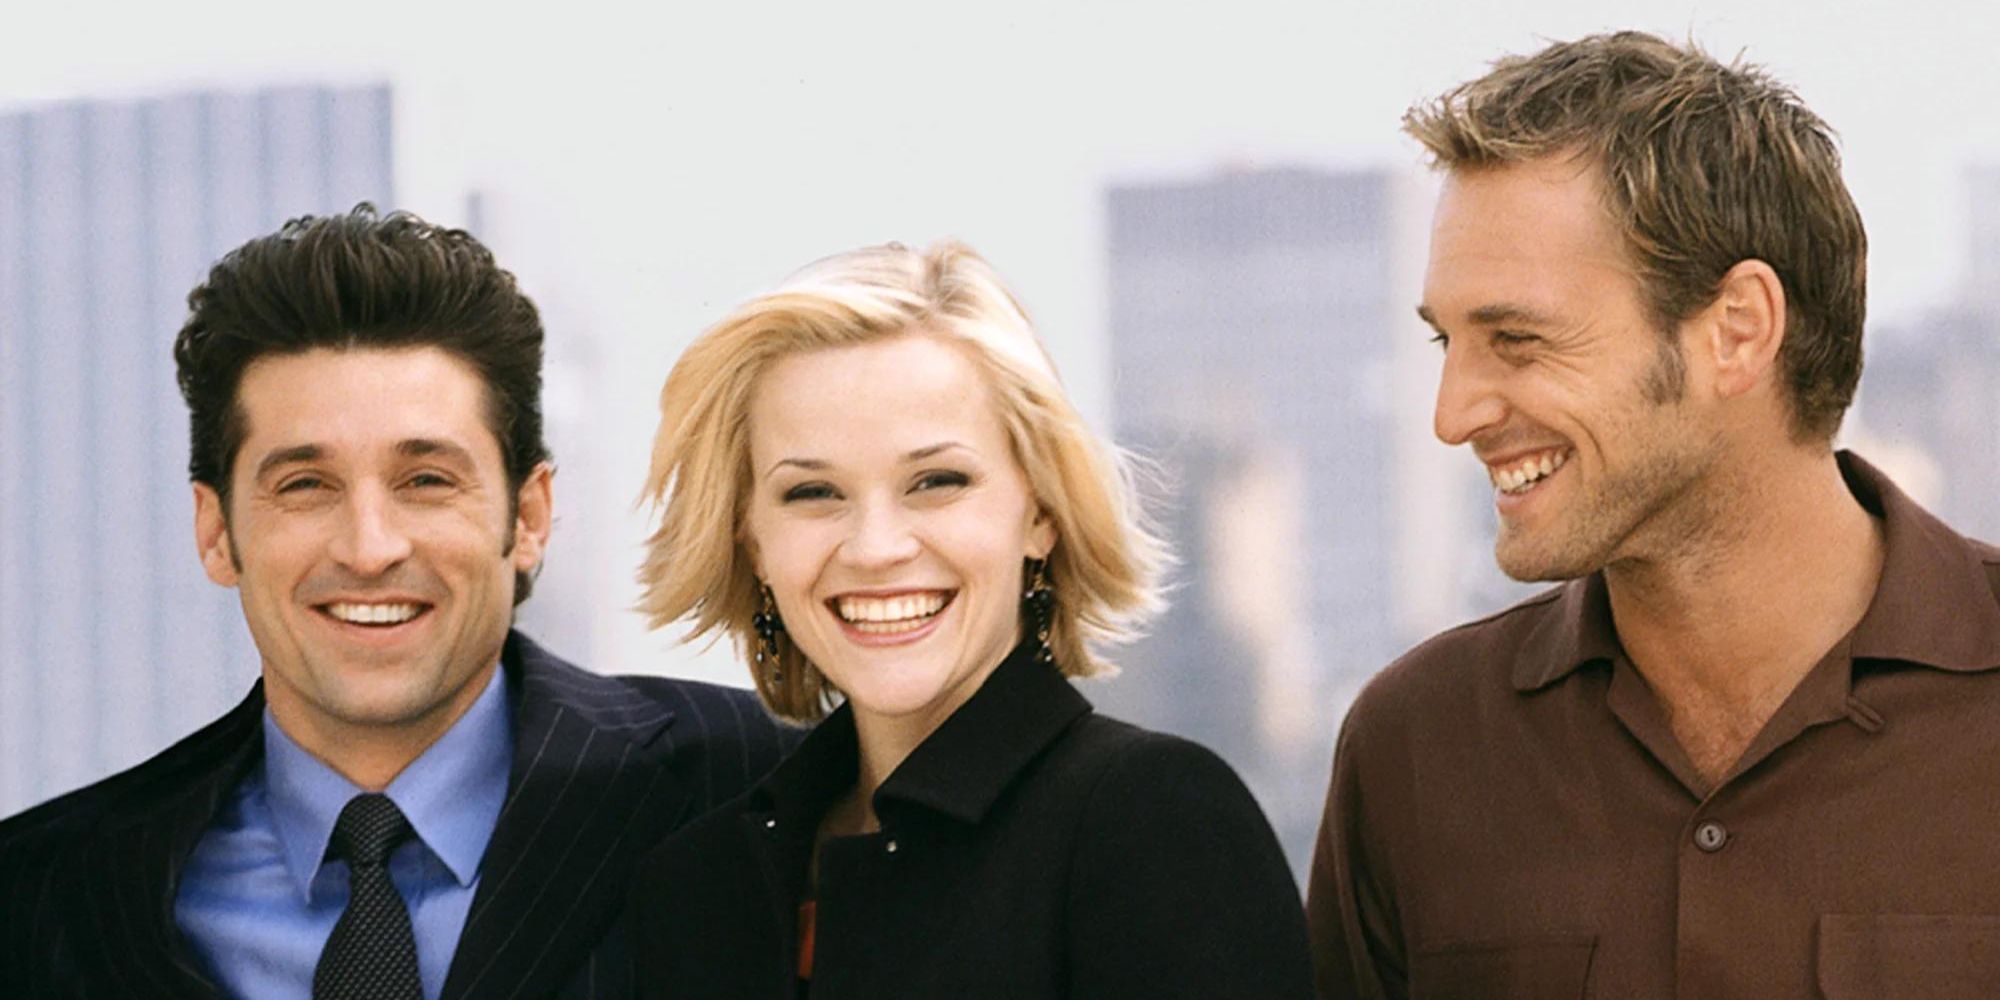 Reese Witherspoon, Josh Lucas and Patrick Dempsey smiling in a promo image for Sweet Home Alabama